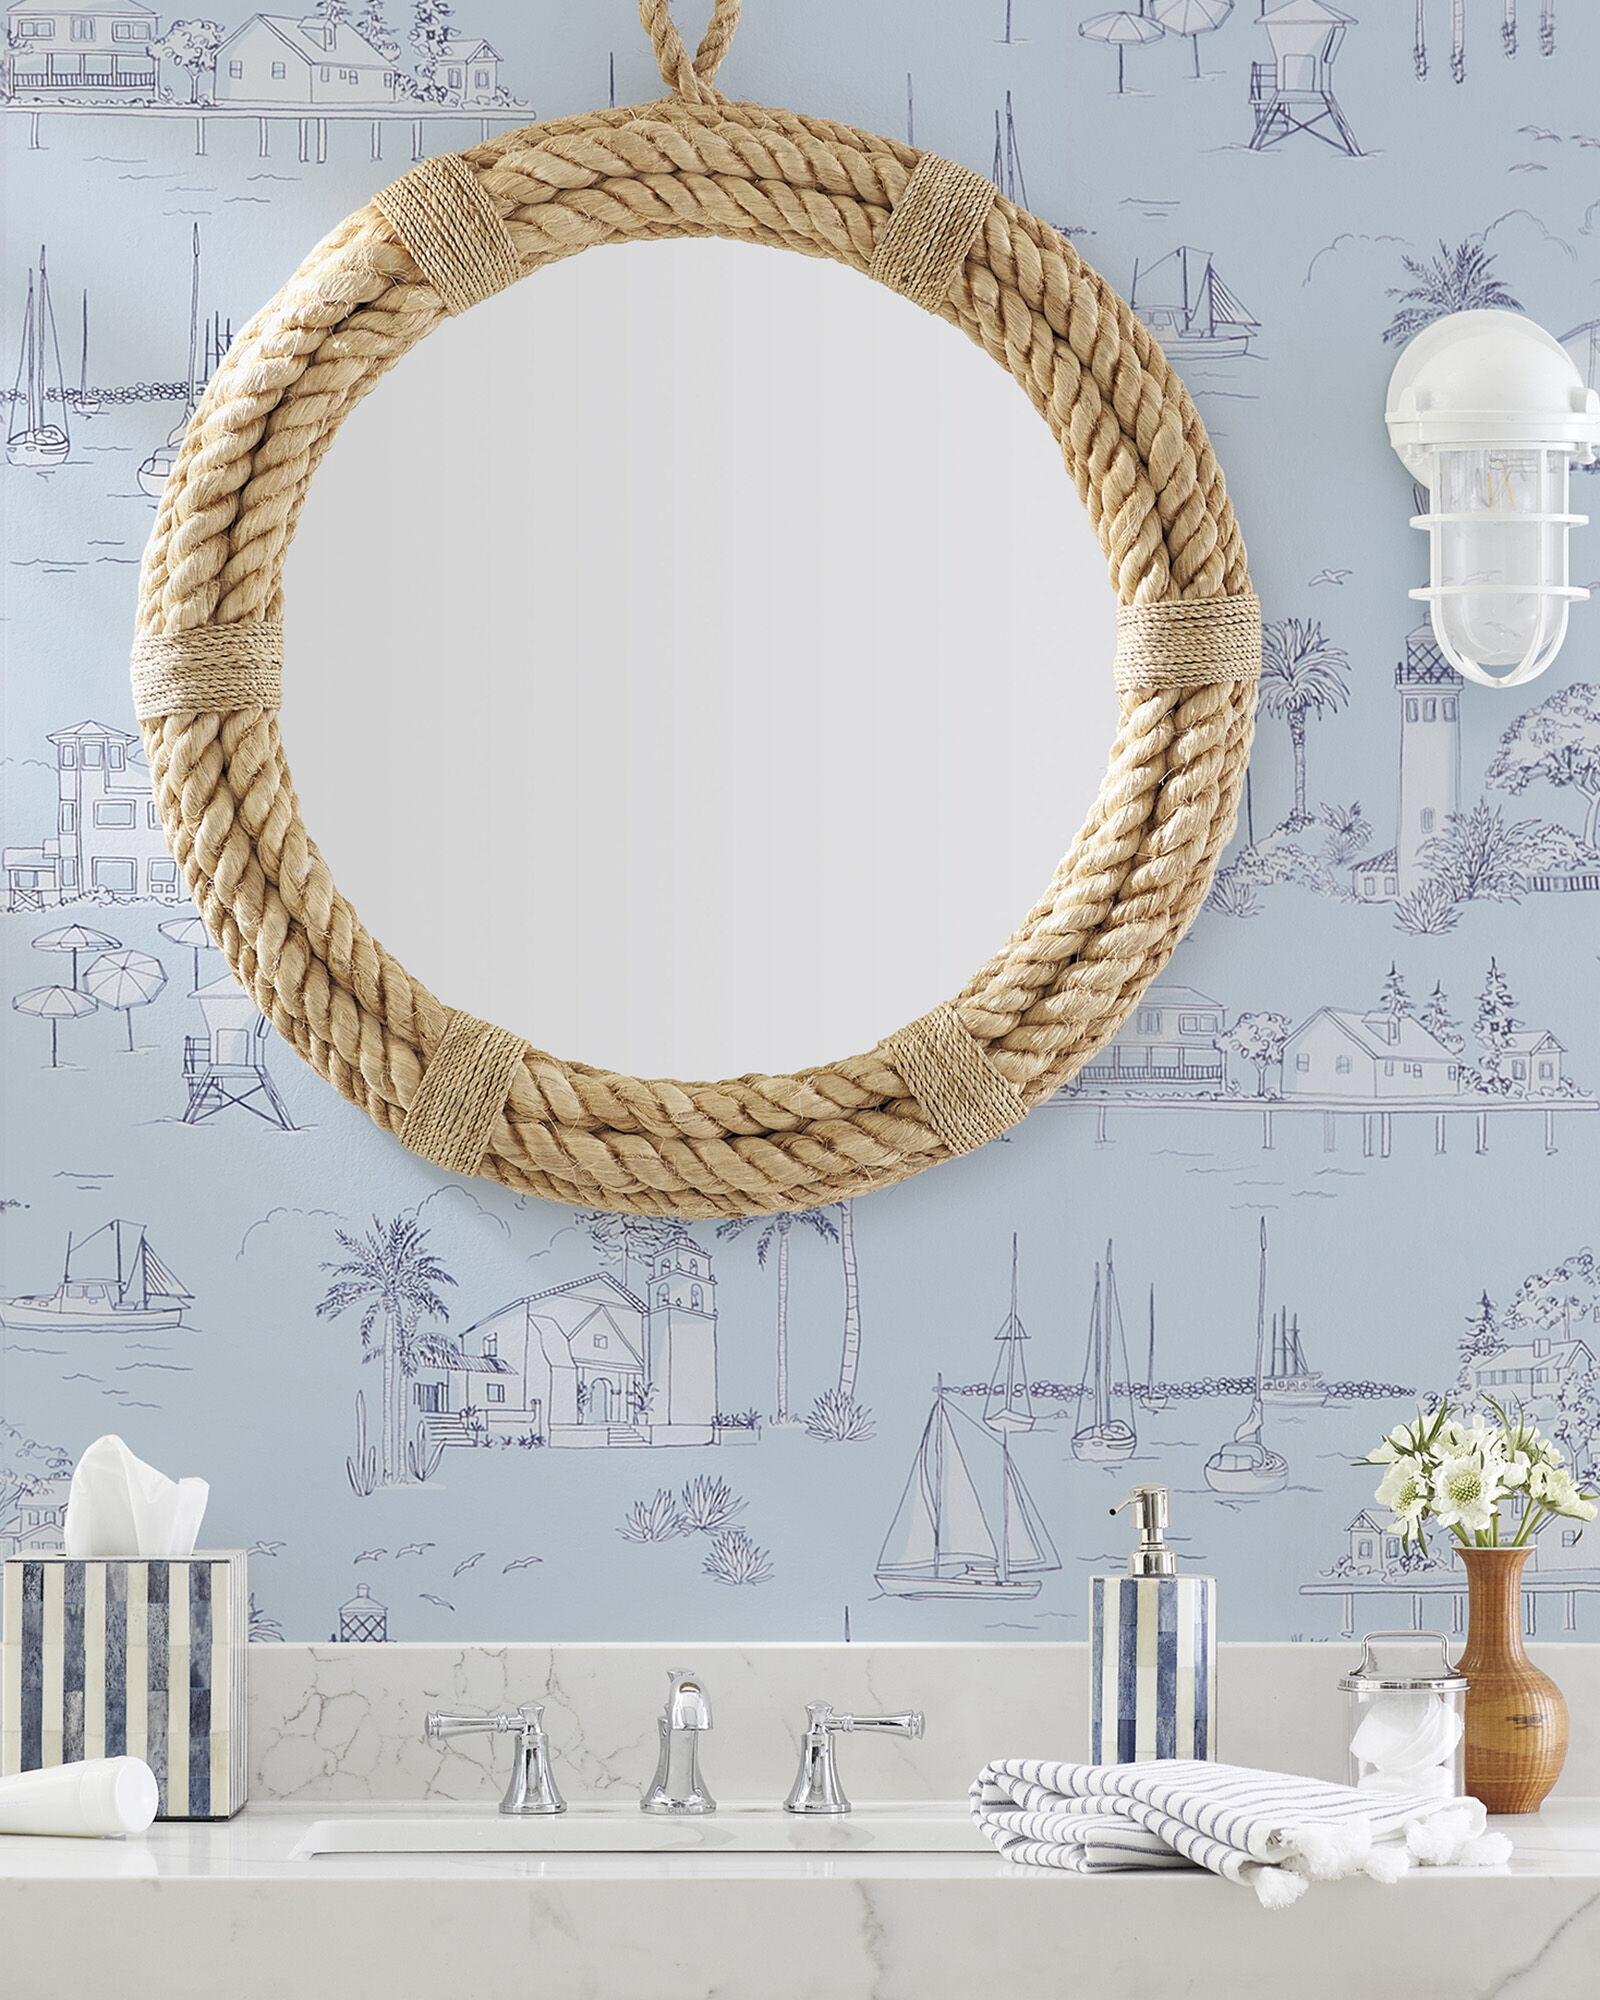 Install a Nautical Rope Mirror